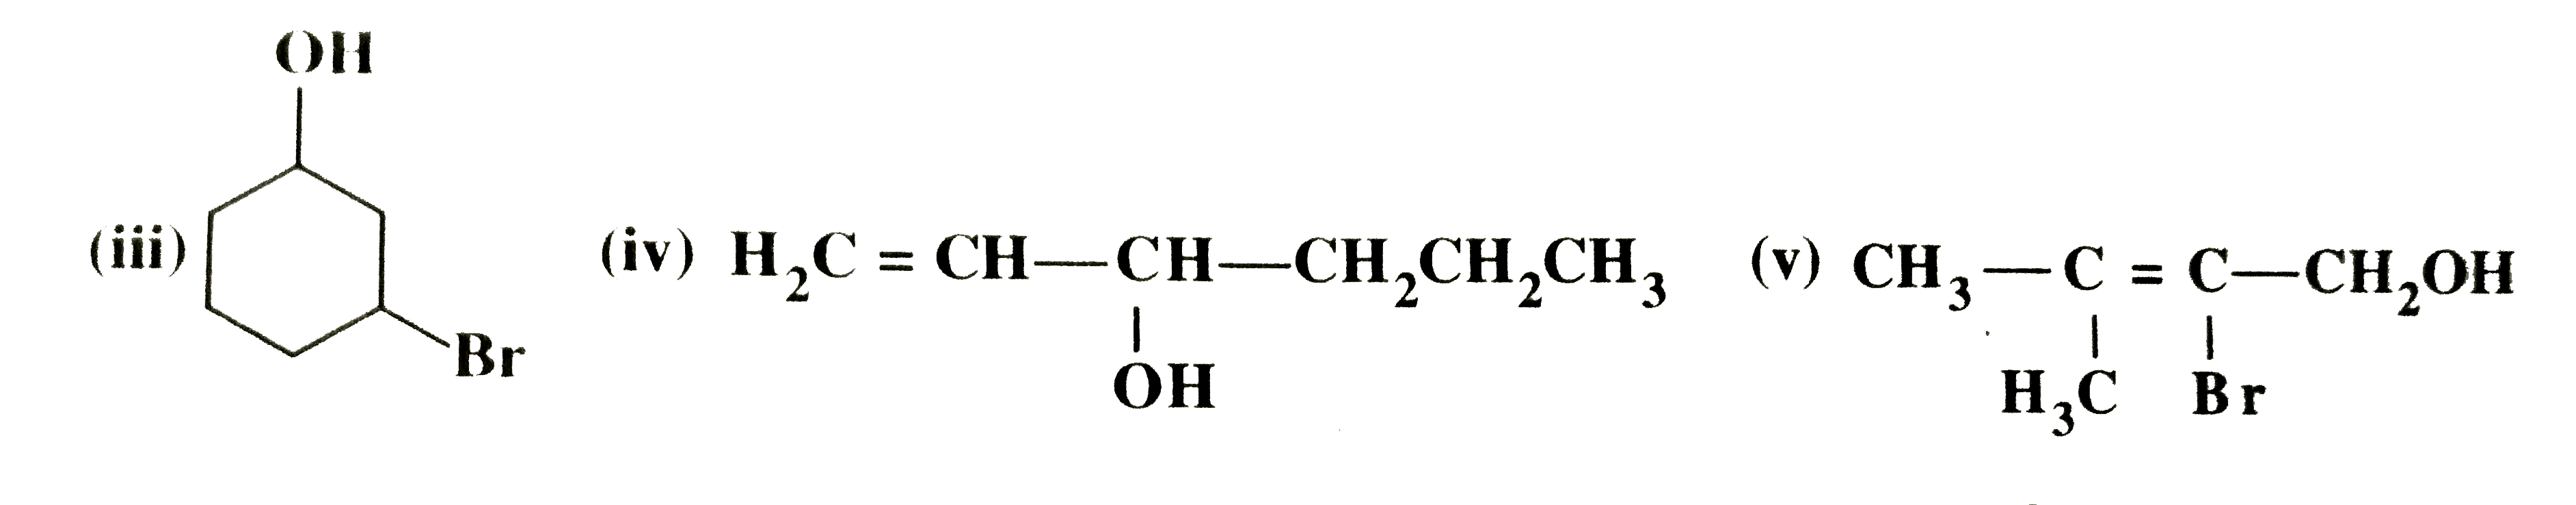 Name the following compounds according to the IUPAC system:   (i) CH(3)CH(2)-underset(CH(2)Cl)underset(|)(C)H-underset(CH(3)OH)underset(|)(C)H-underset(CH(3))underset(|)(C)H-CH(3)   (ii) CH(3)-underset(CH(3))underset(|)(C)H-CH(2)-underset(OH)underset(|)(C)H-underset(CH(3)OH)underset(|)(C)H-CH(3)      (iv) H(2)C=CH-underset(OH)underset(|)(C)H-CH(2)CH(2)CH(3)   (v) CH(3)-underset(H(3)C)underset(|)(C)=underset(Br)underset(|)(C)-CH(2)OH